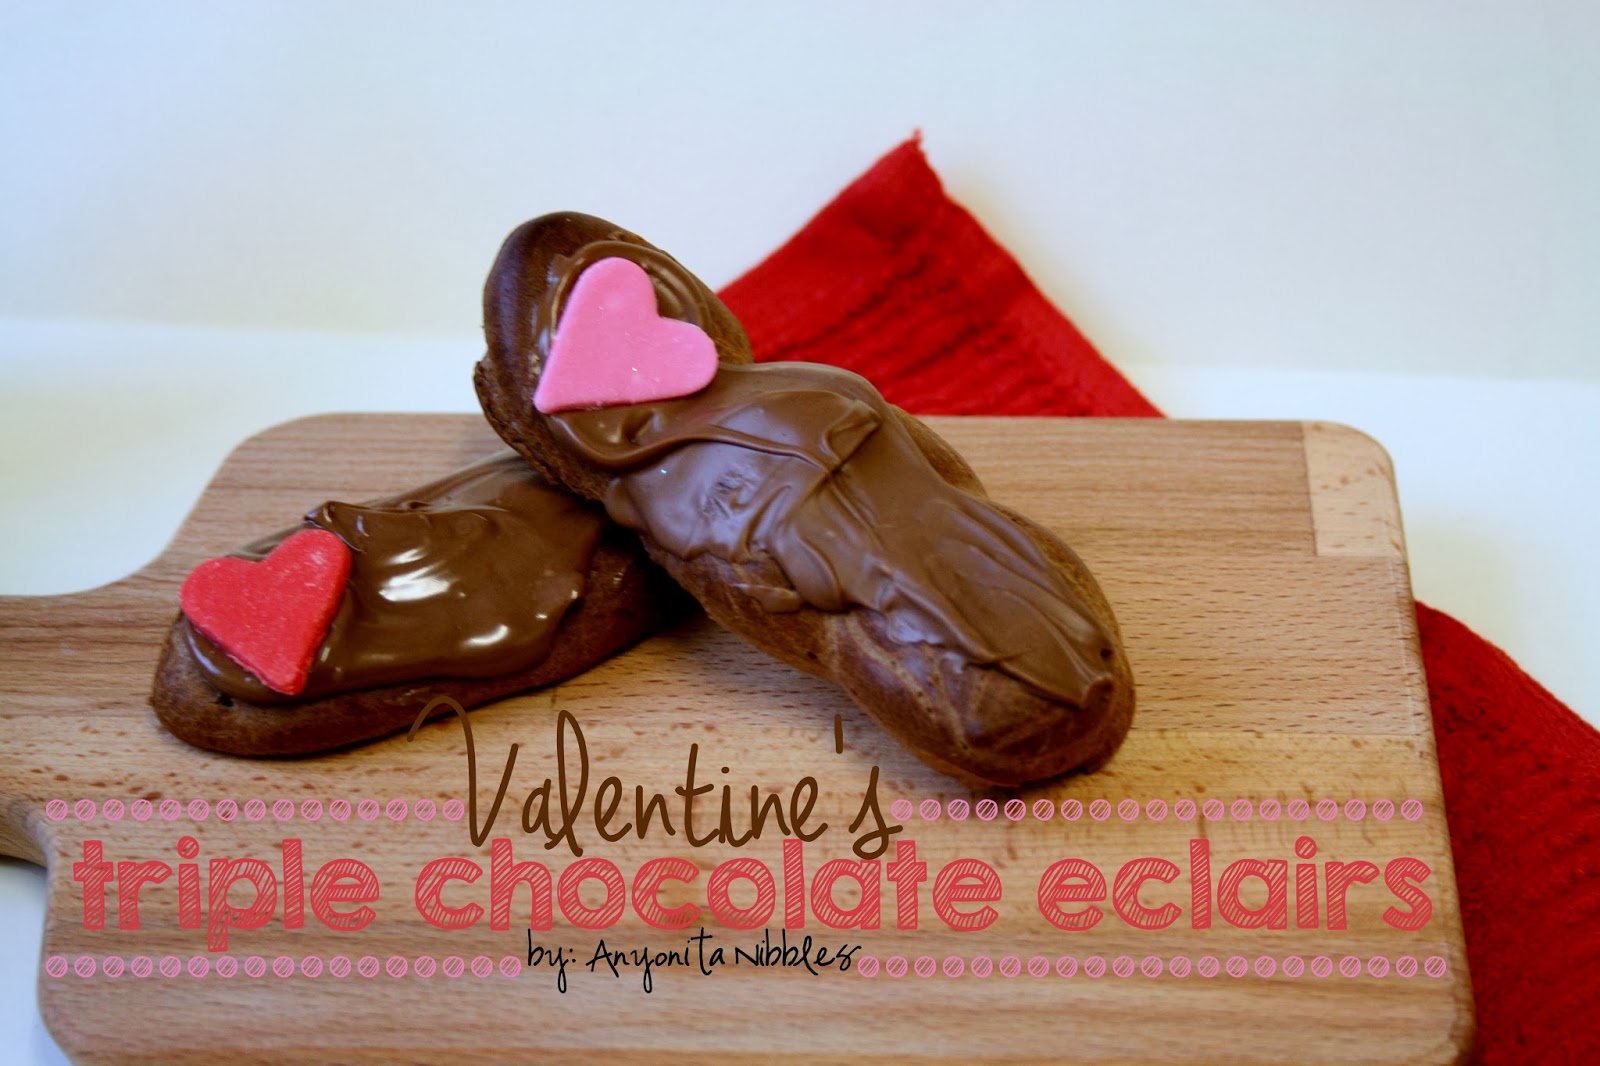 Valentine's Triple Chocolate Eclairs from Anyonita-nibbles.co.uk